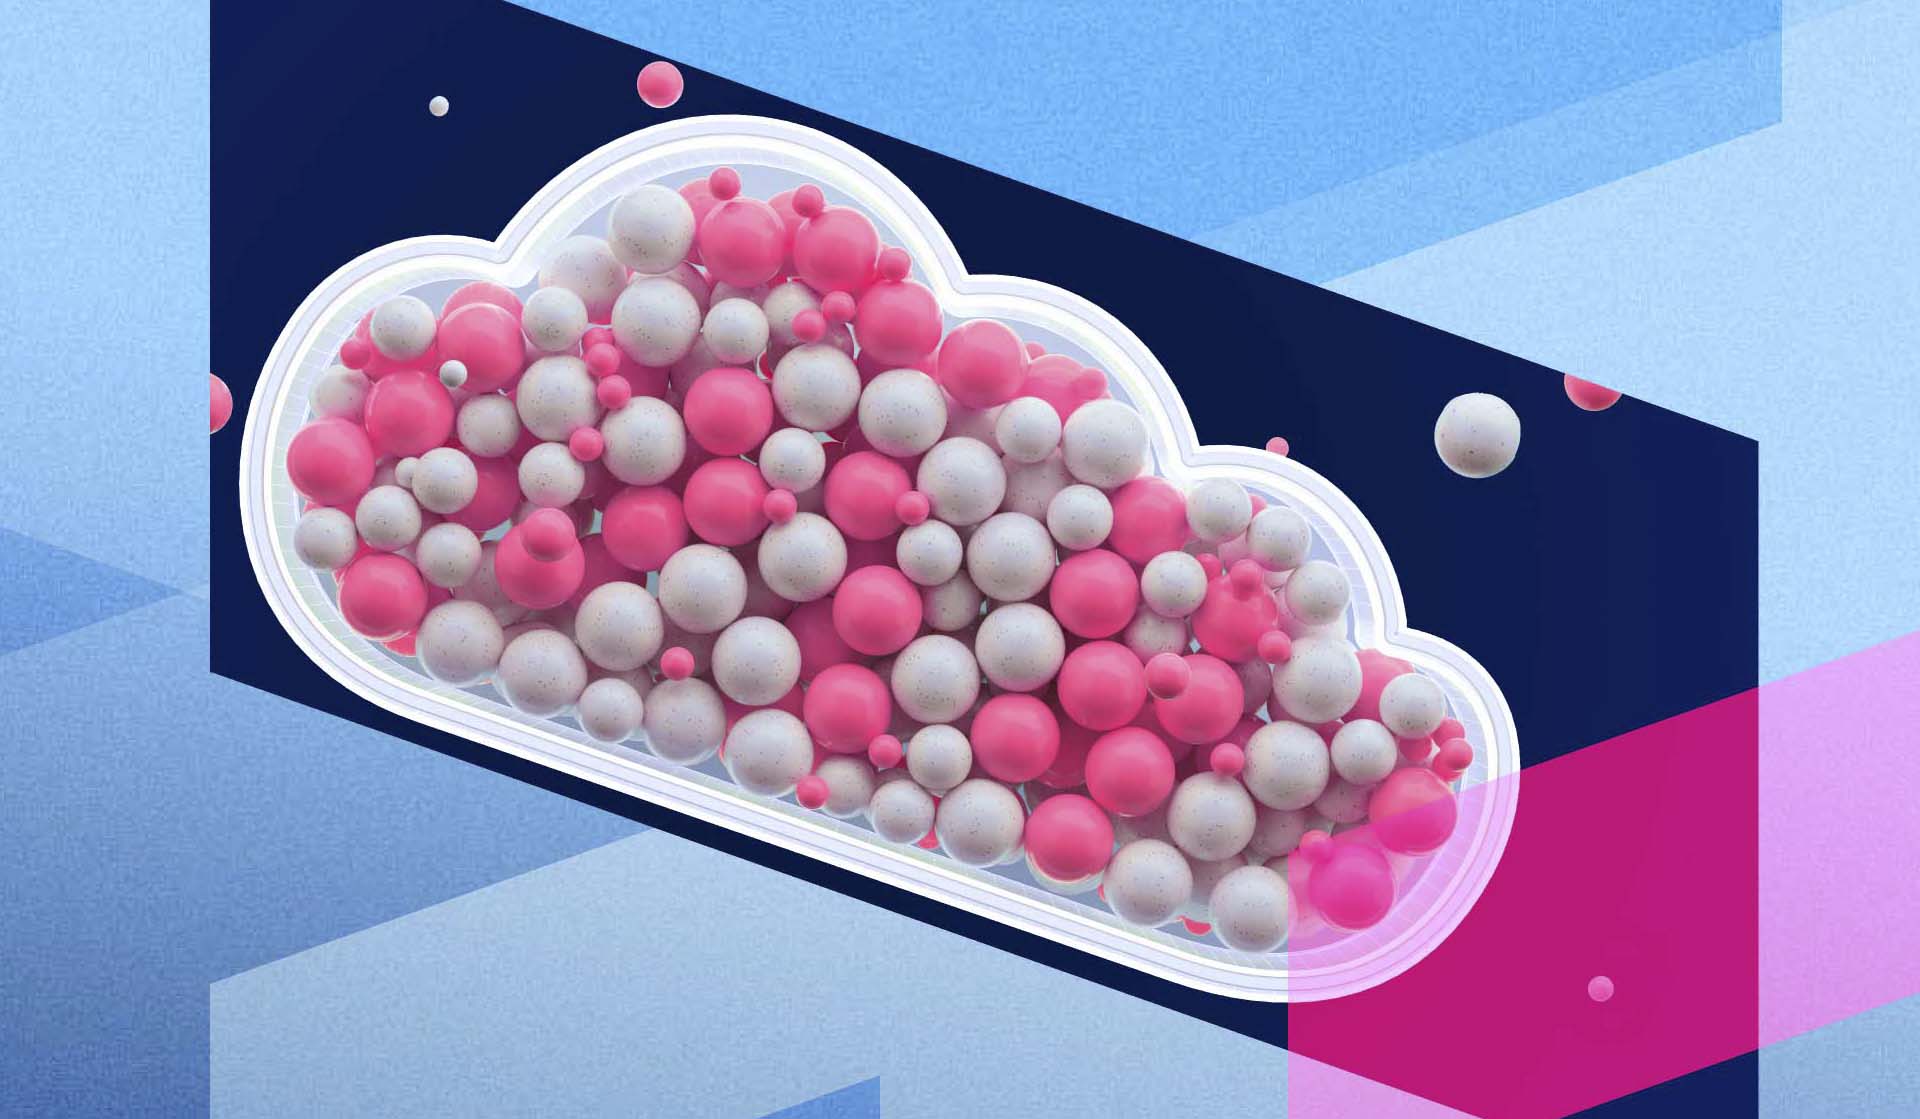 Hundreds of white and pink balls fitting perfectly into in a cloud container